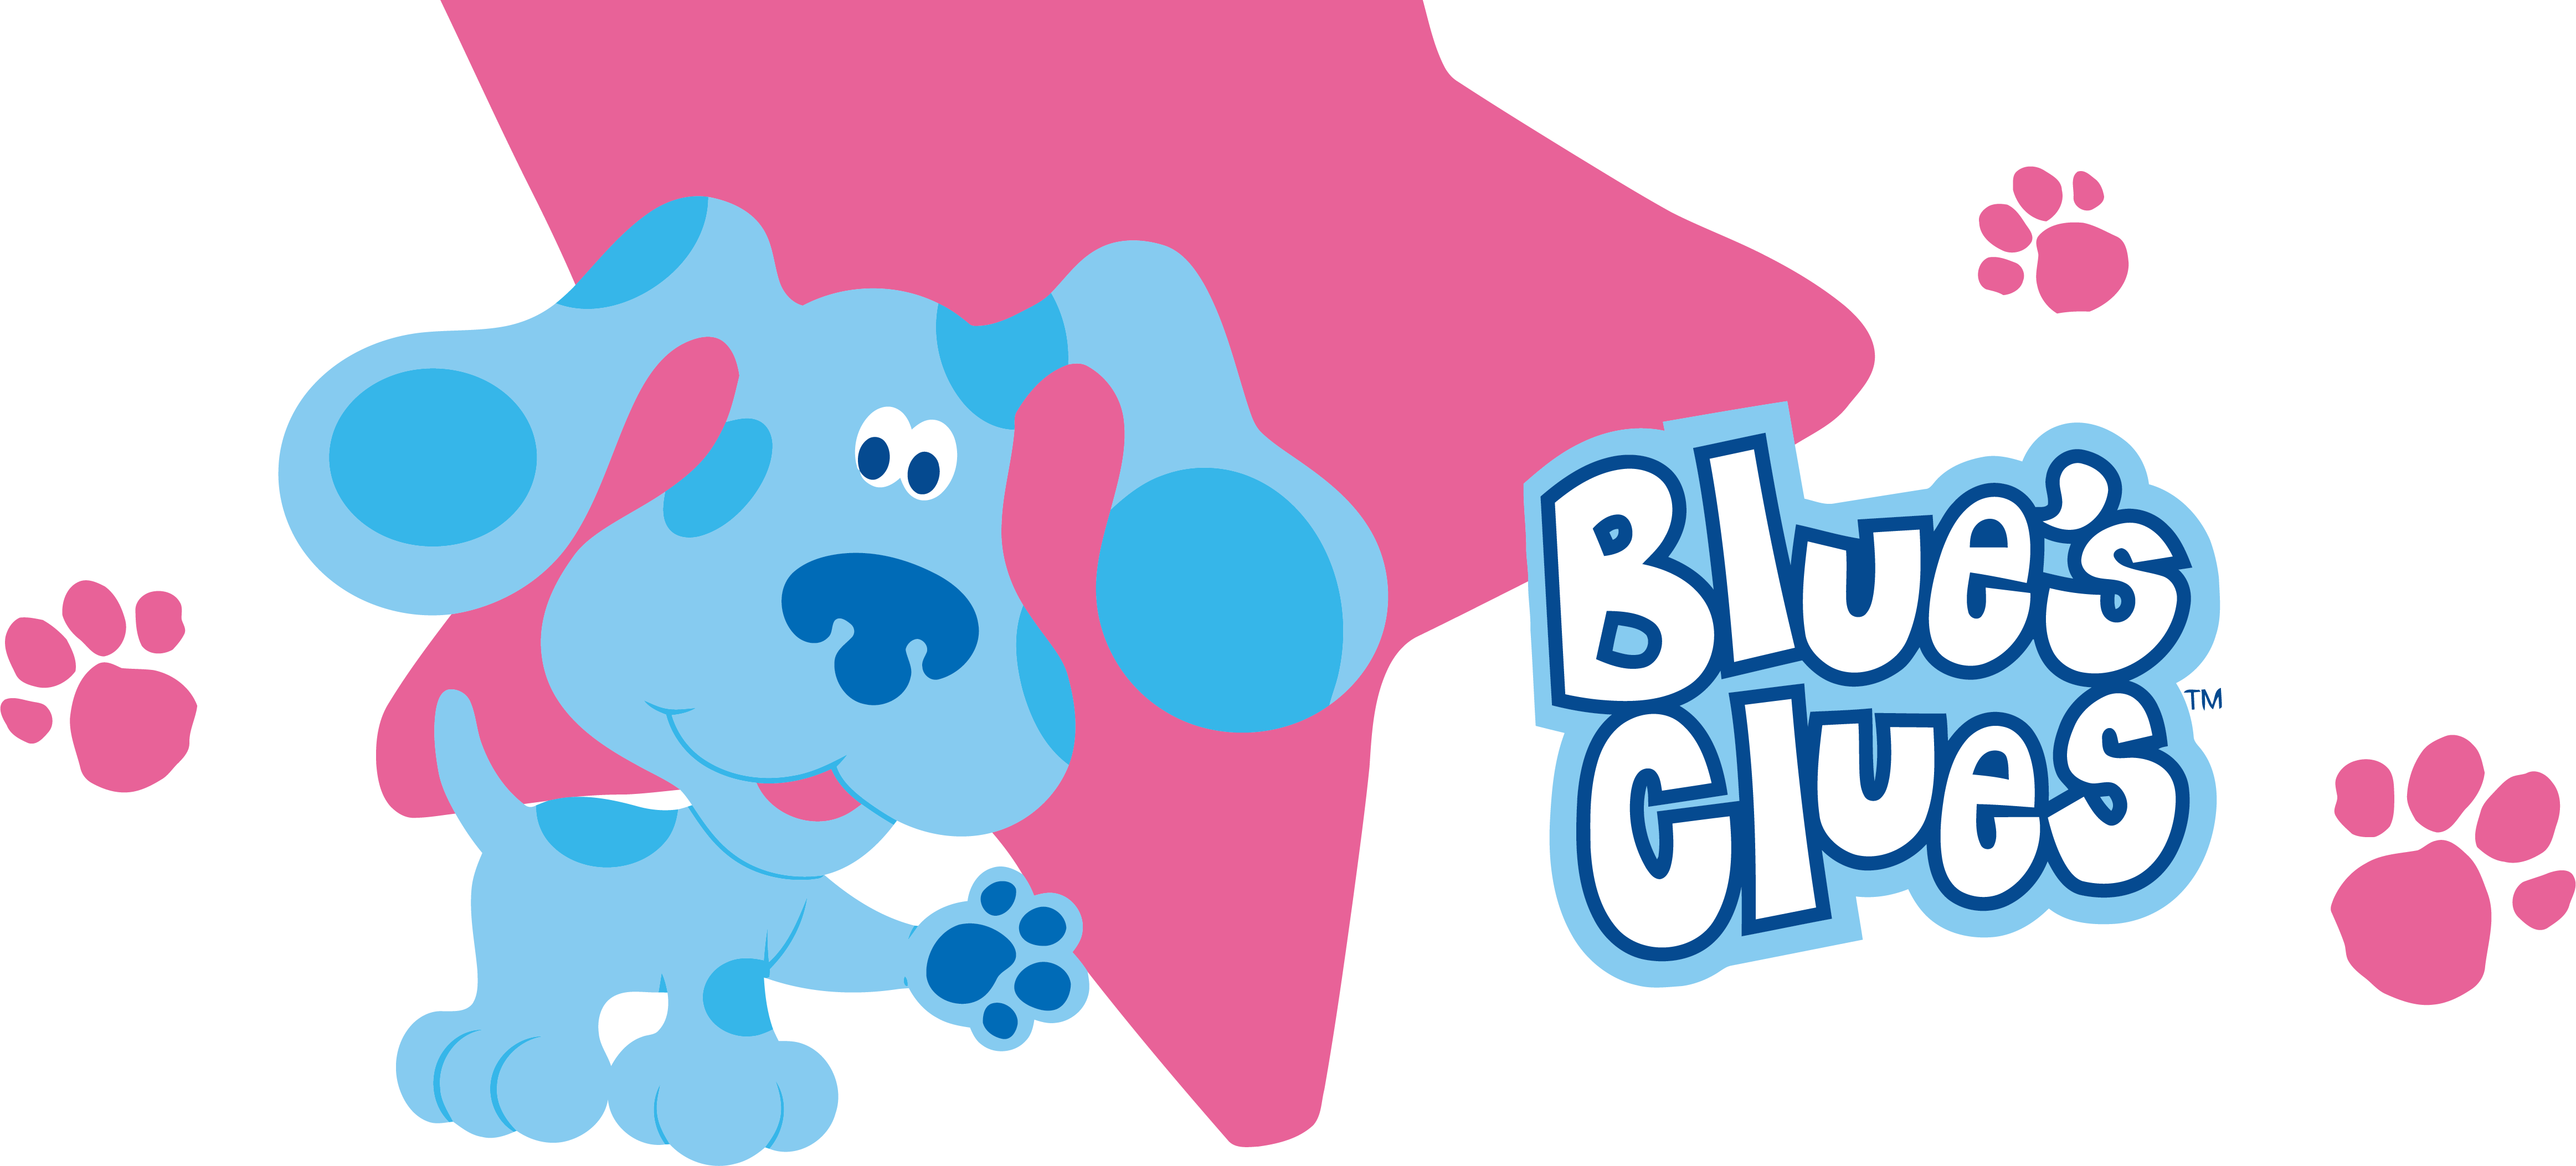 1 Result Images of Blues Clues Png - PNG Image Collection